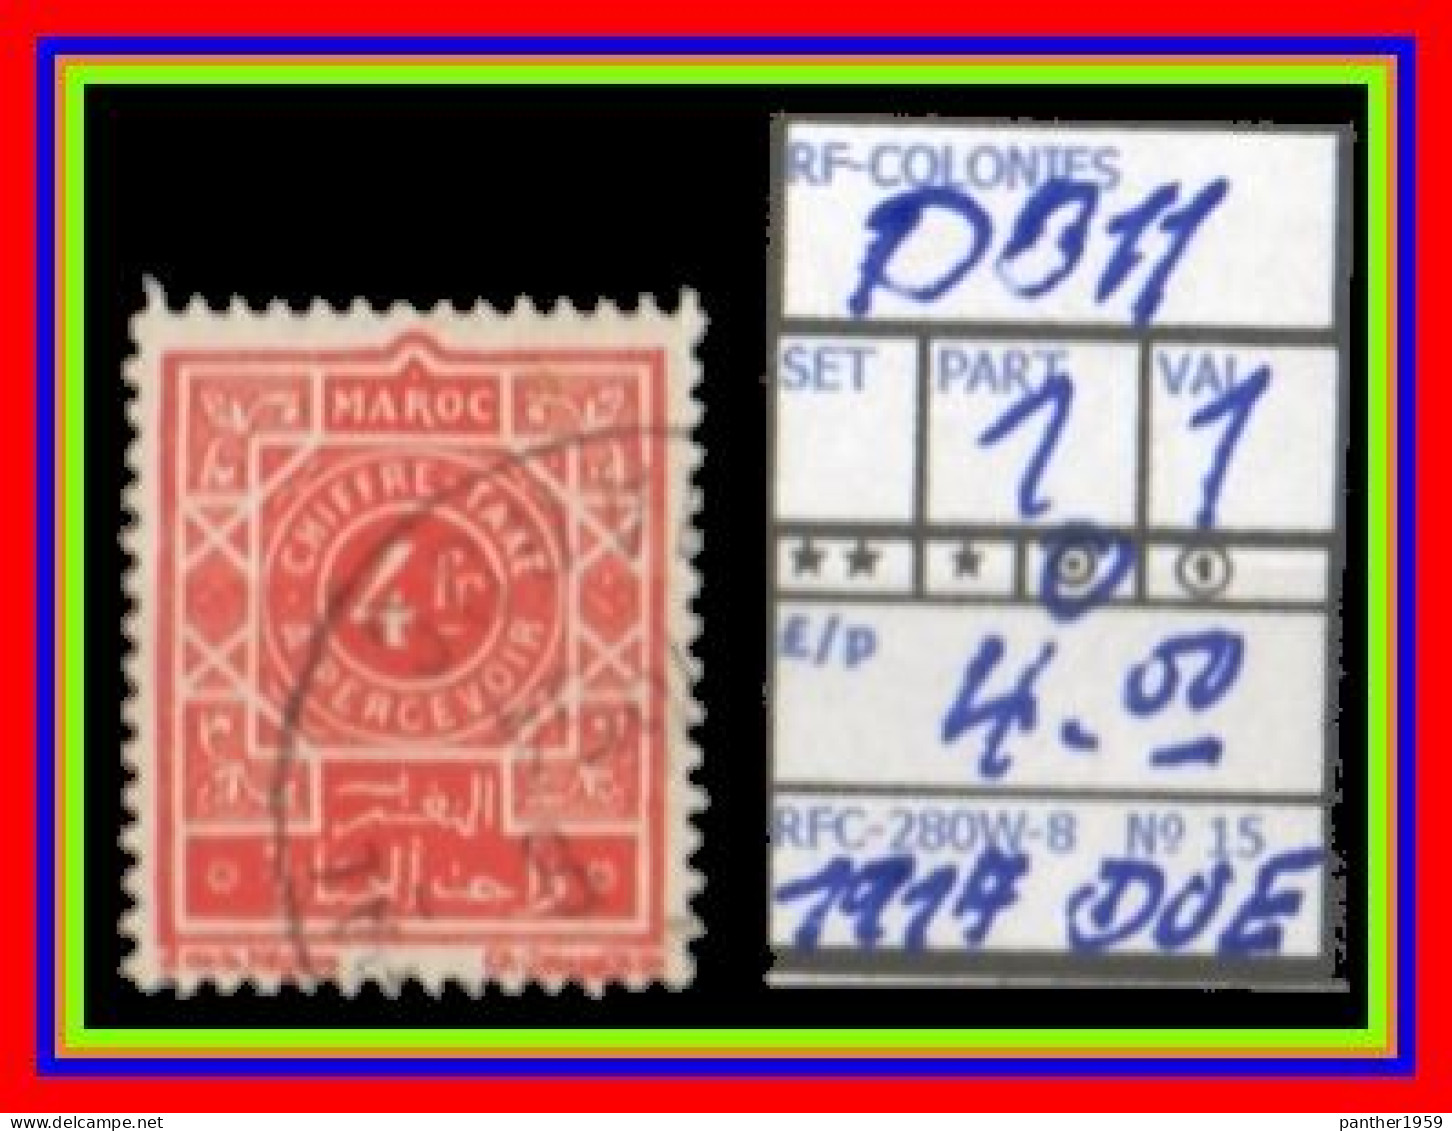 EUROPE>FRANCE COLONIES# MOROCCO# #DEFINITIVES#PARTIAL SET# MNH/**MH*#USED (RFC-280W-8) (15) - Postage Due